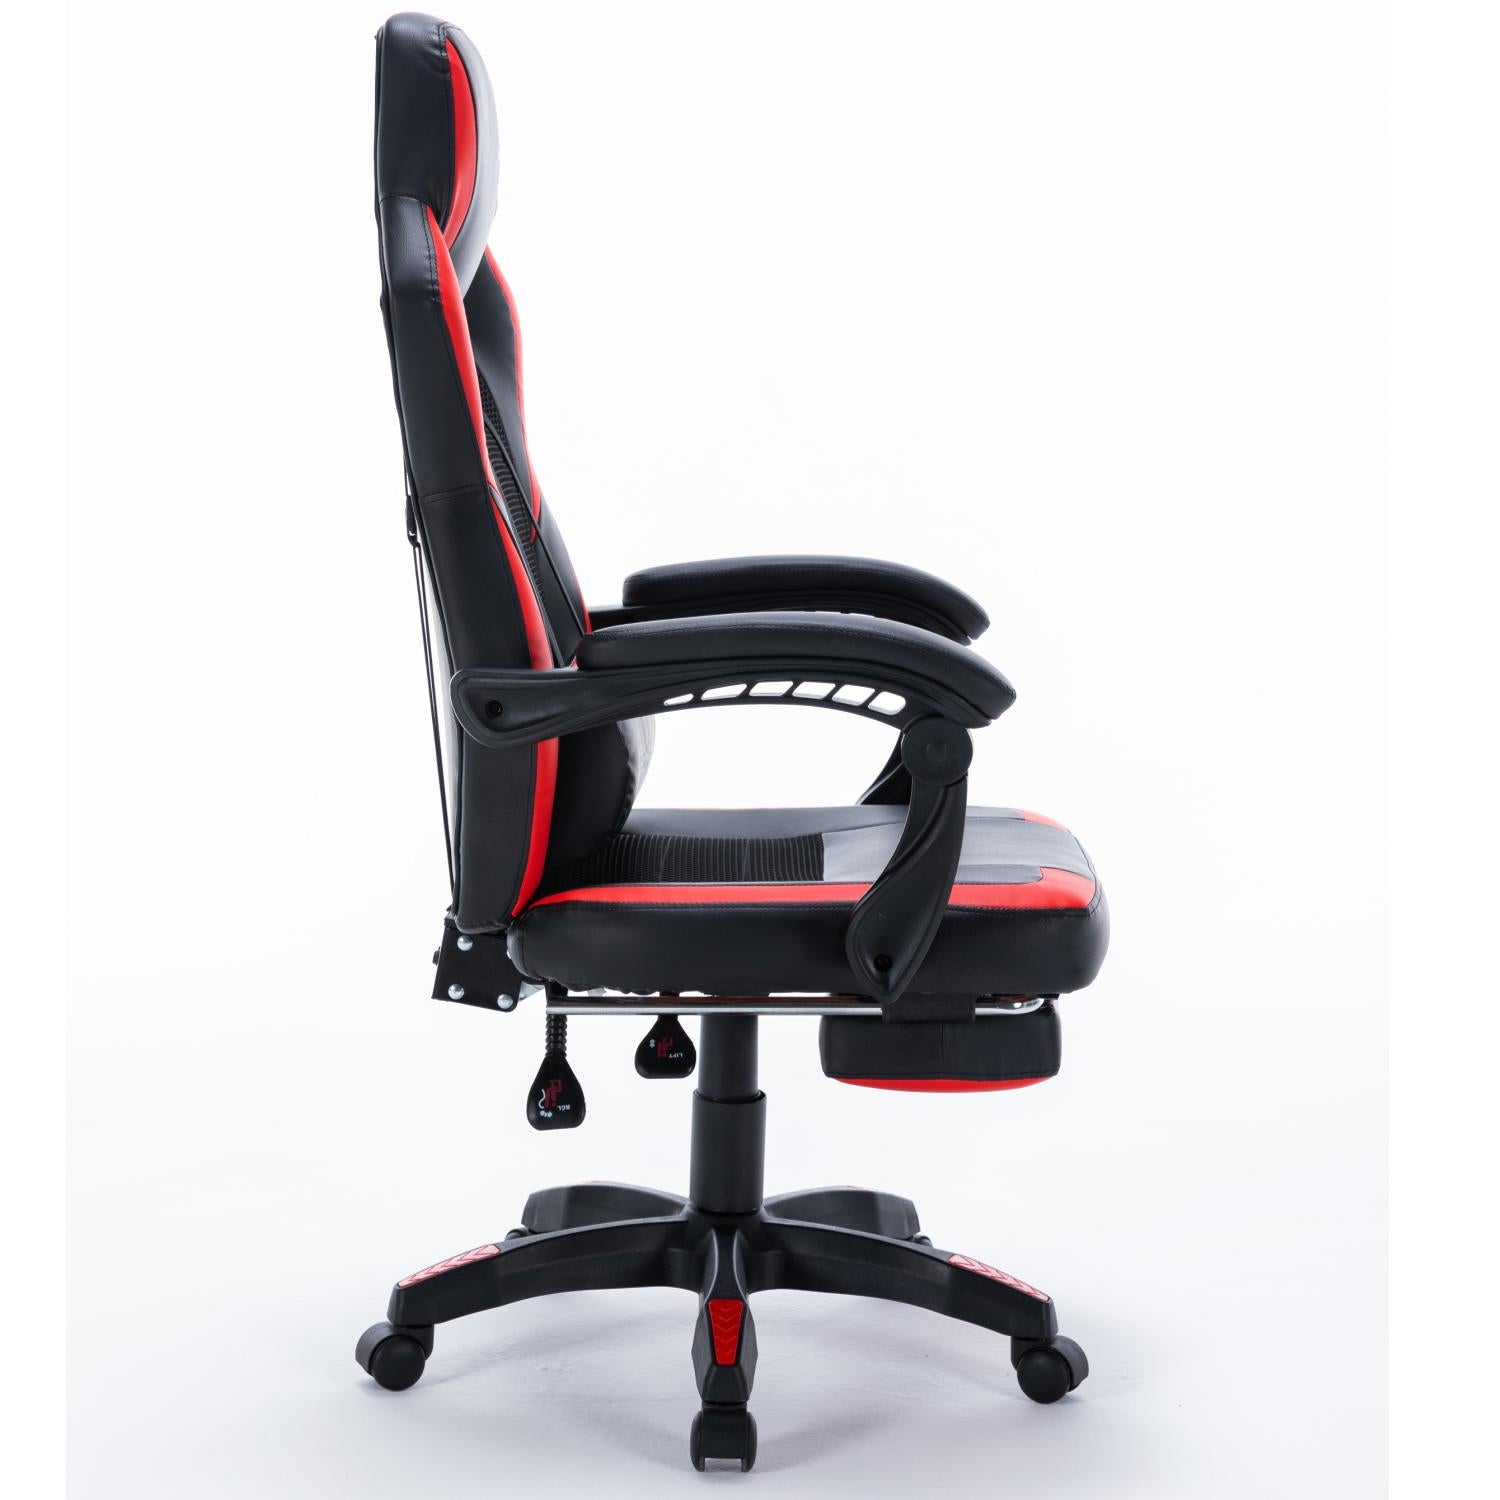 ViscoLogic Merlin Ergonomic Adjustable Swivel Home Office Computer Gaming Chair with Footrest